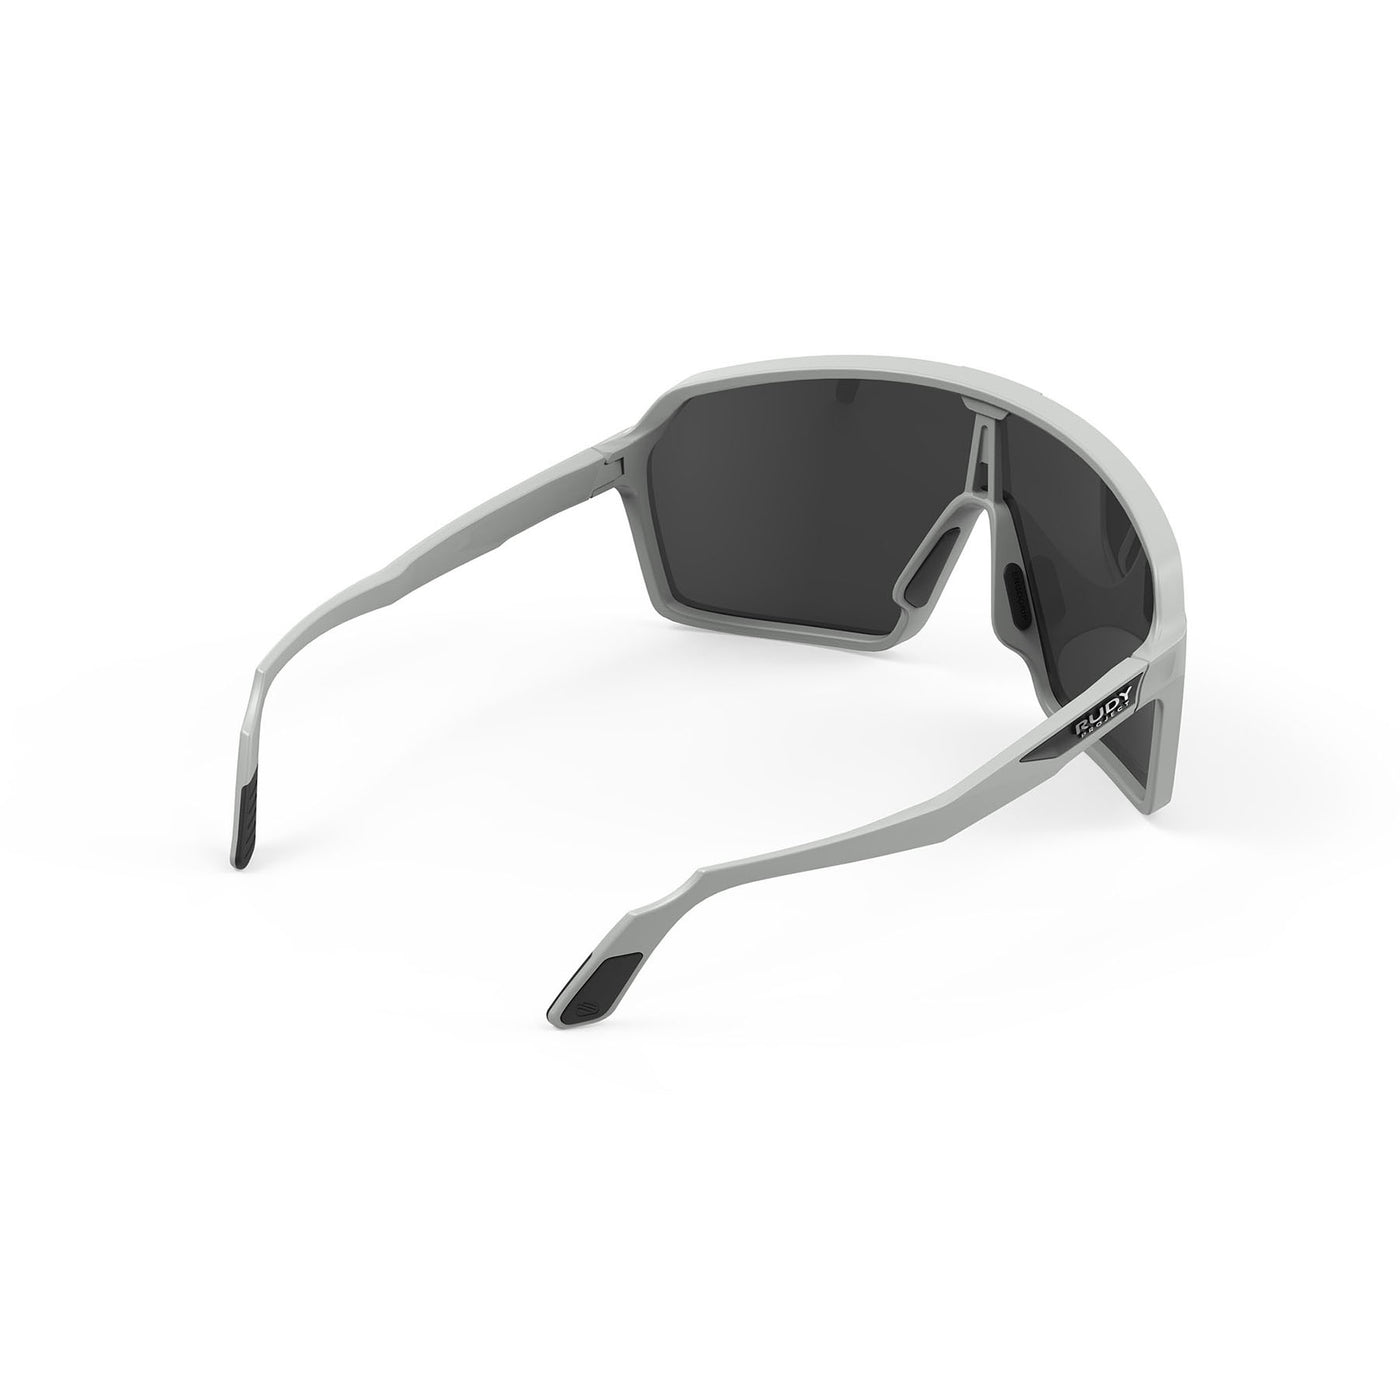 Rudy Project Spinshield running and cycling sunglasses#color_spinshield-light-grey-matte-with-smoke-black-lenses